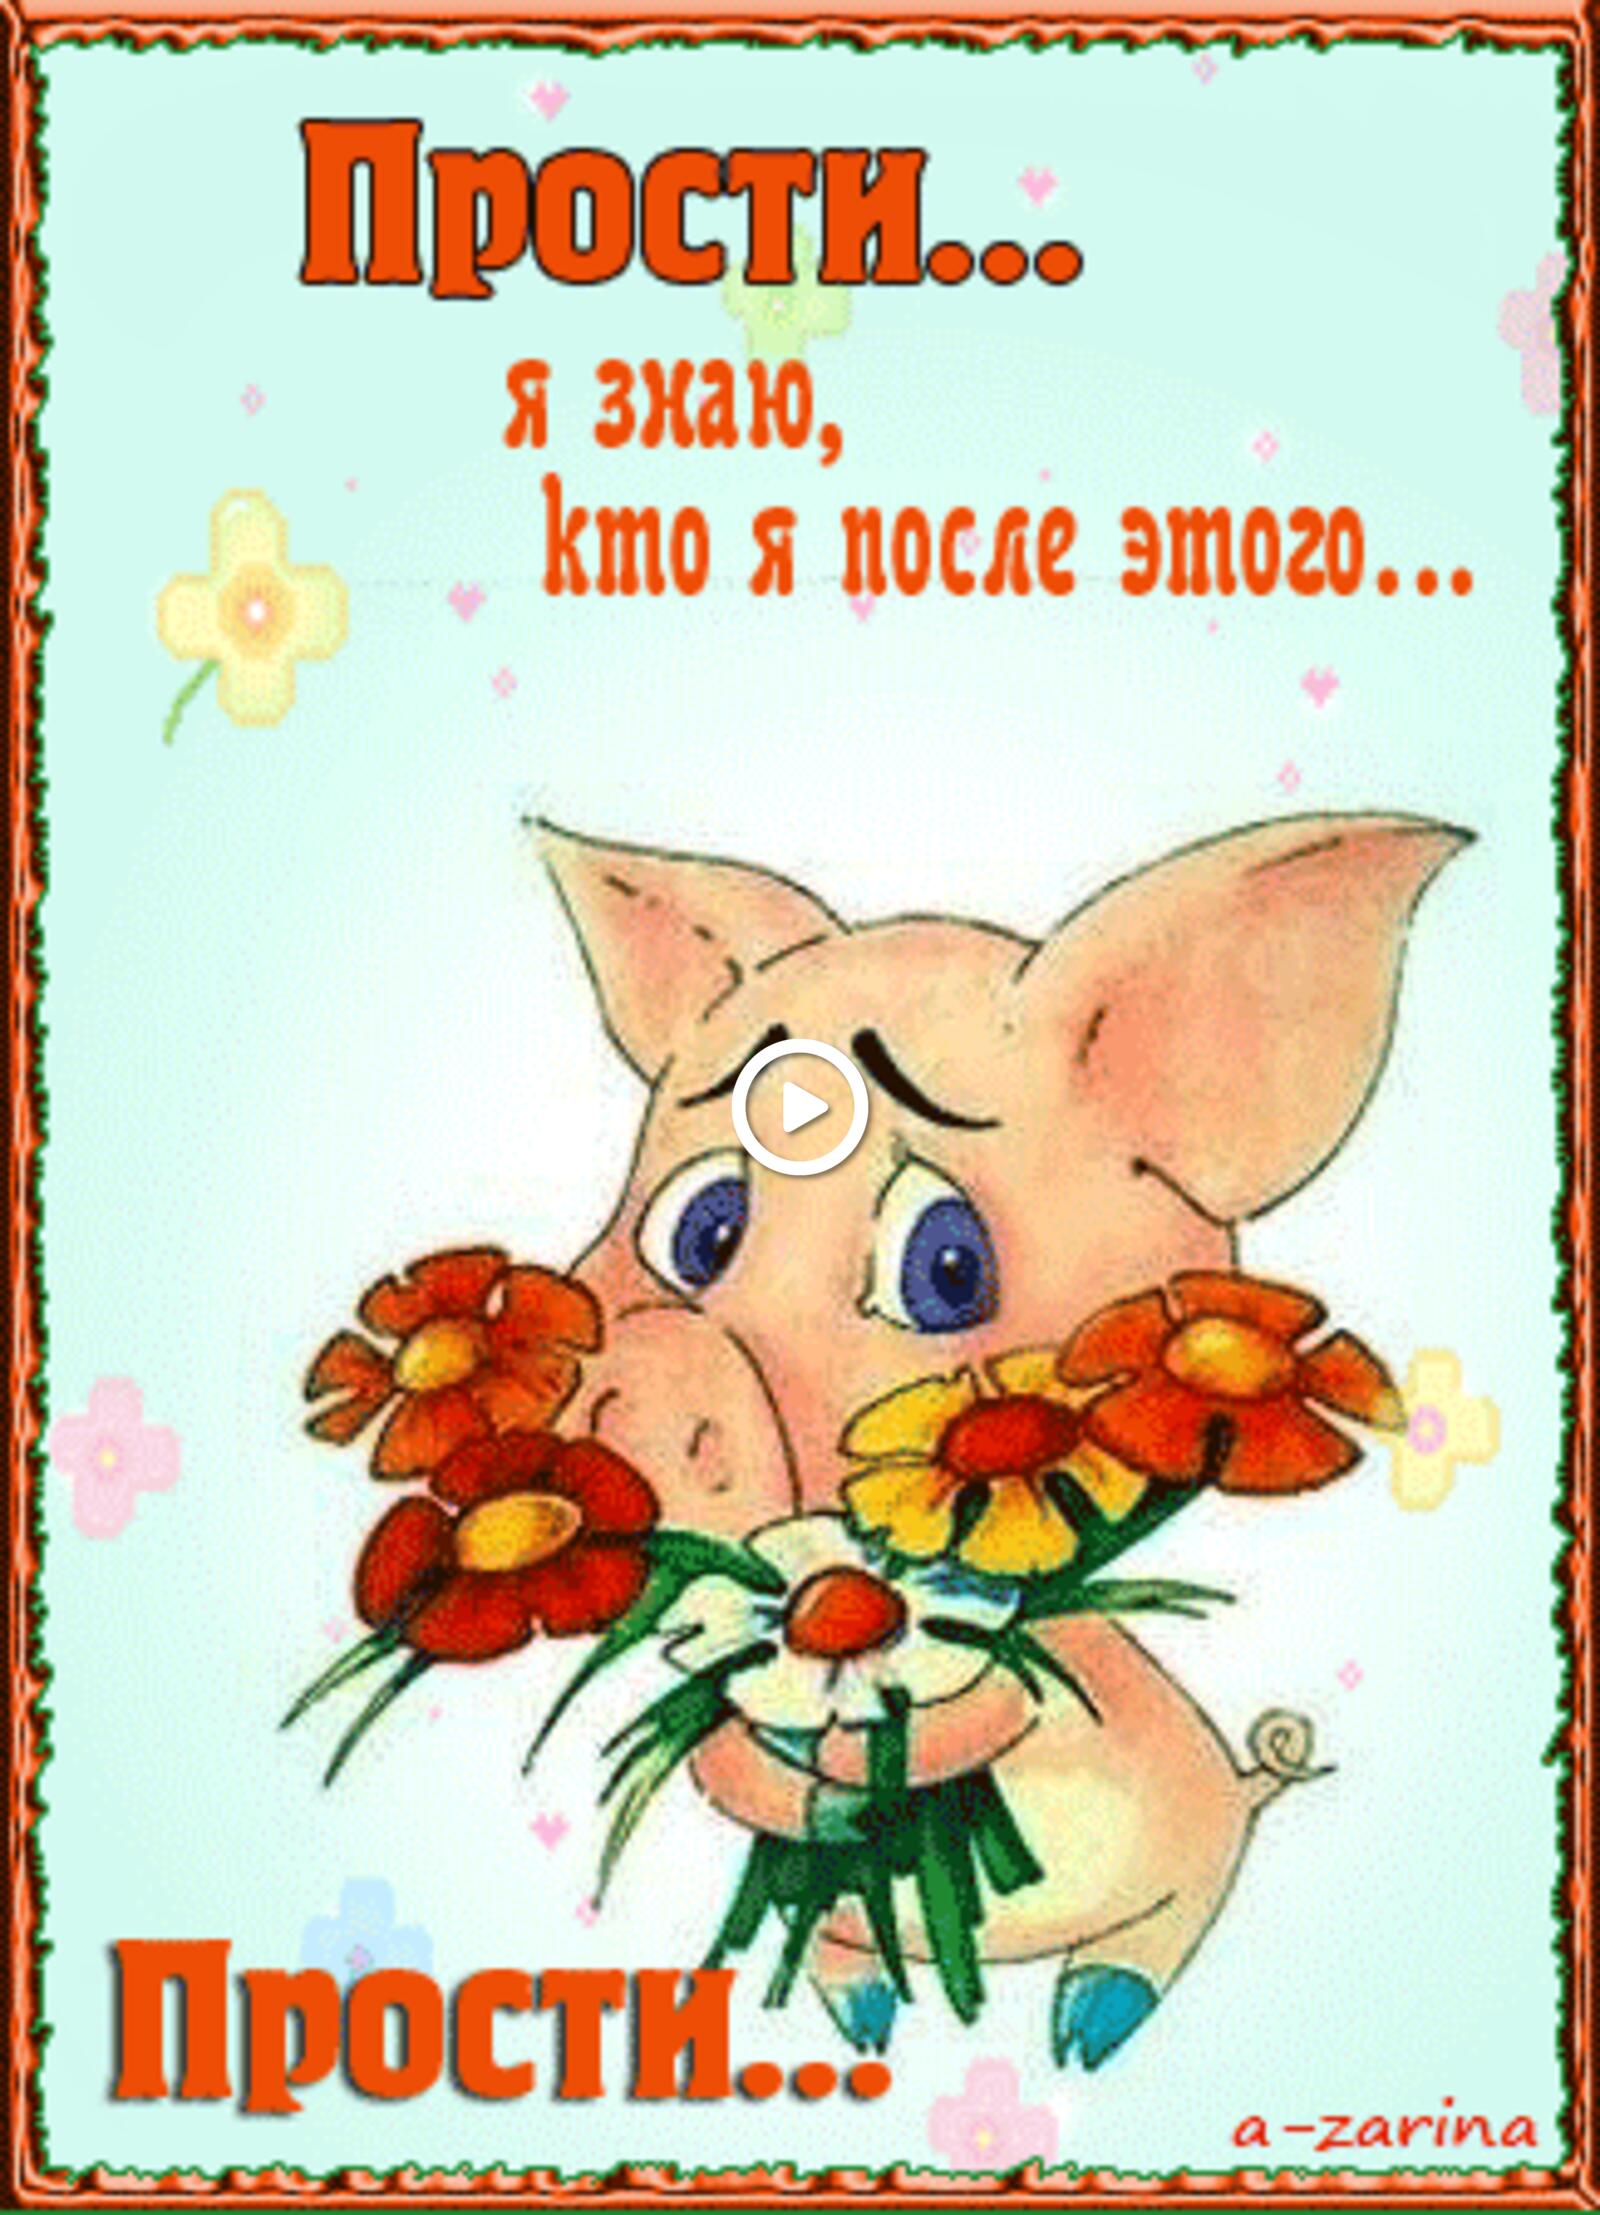 A postcard on the subject of sorry flowers piggy for free